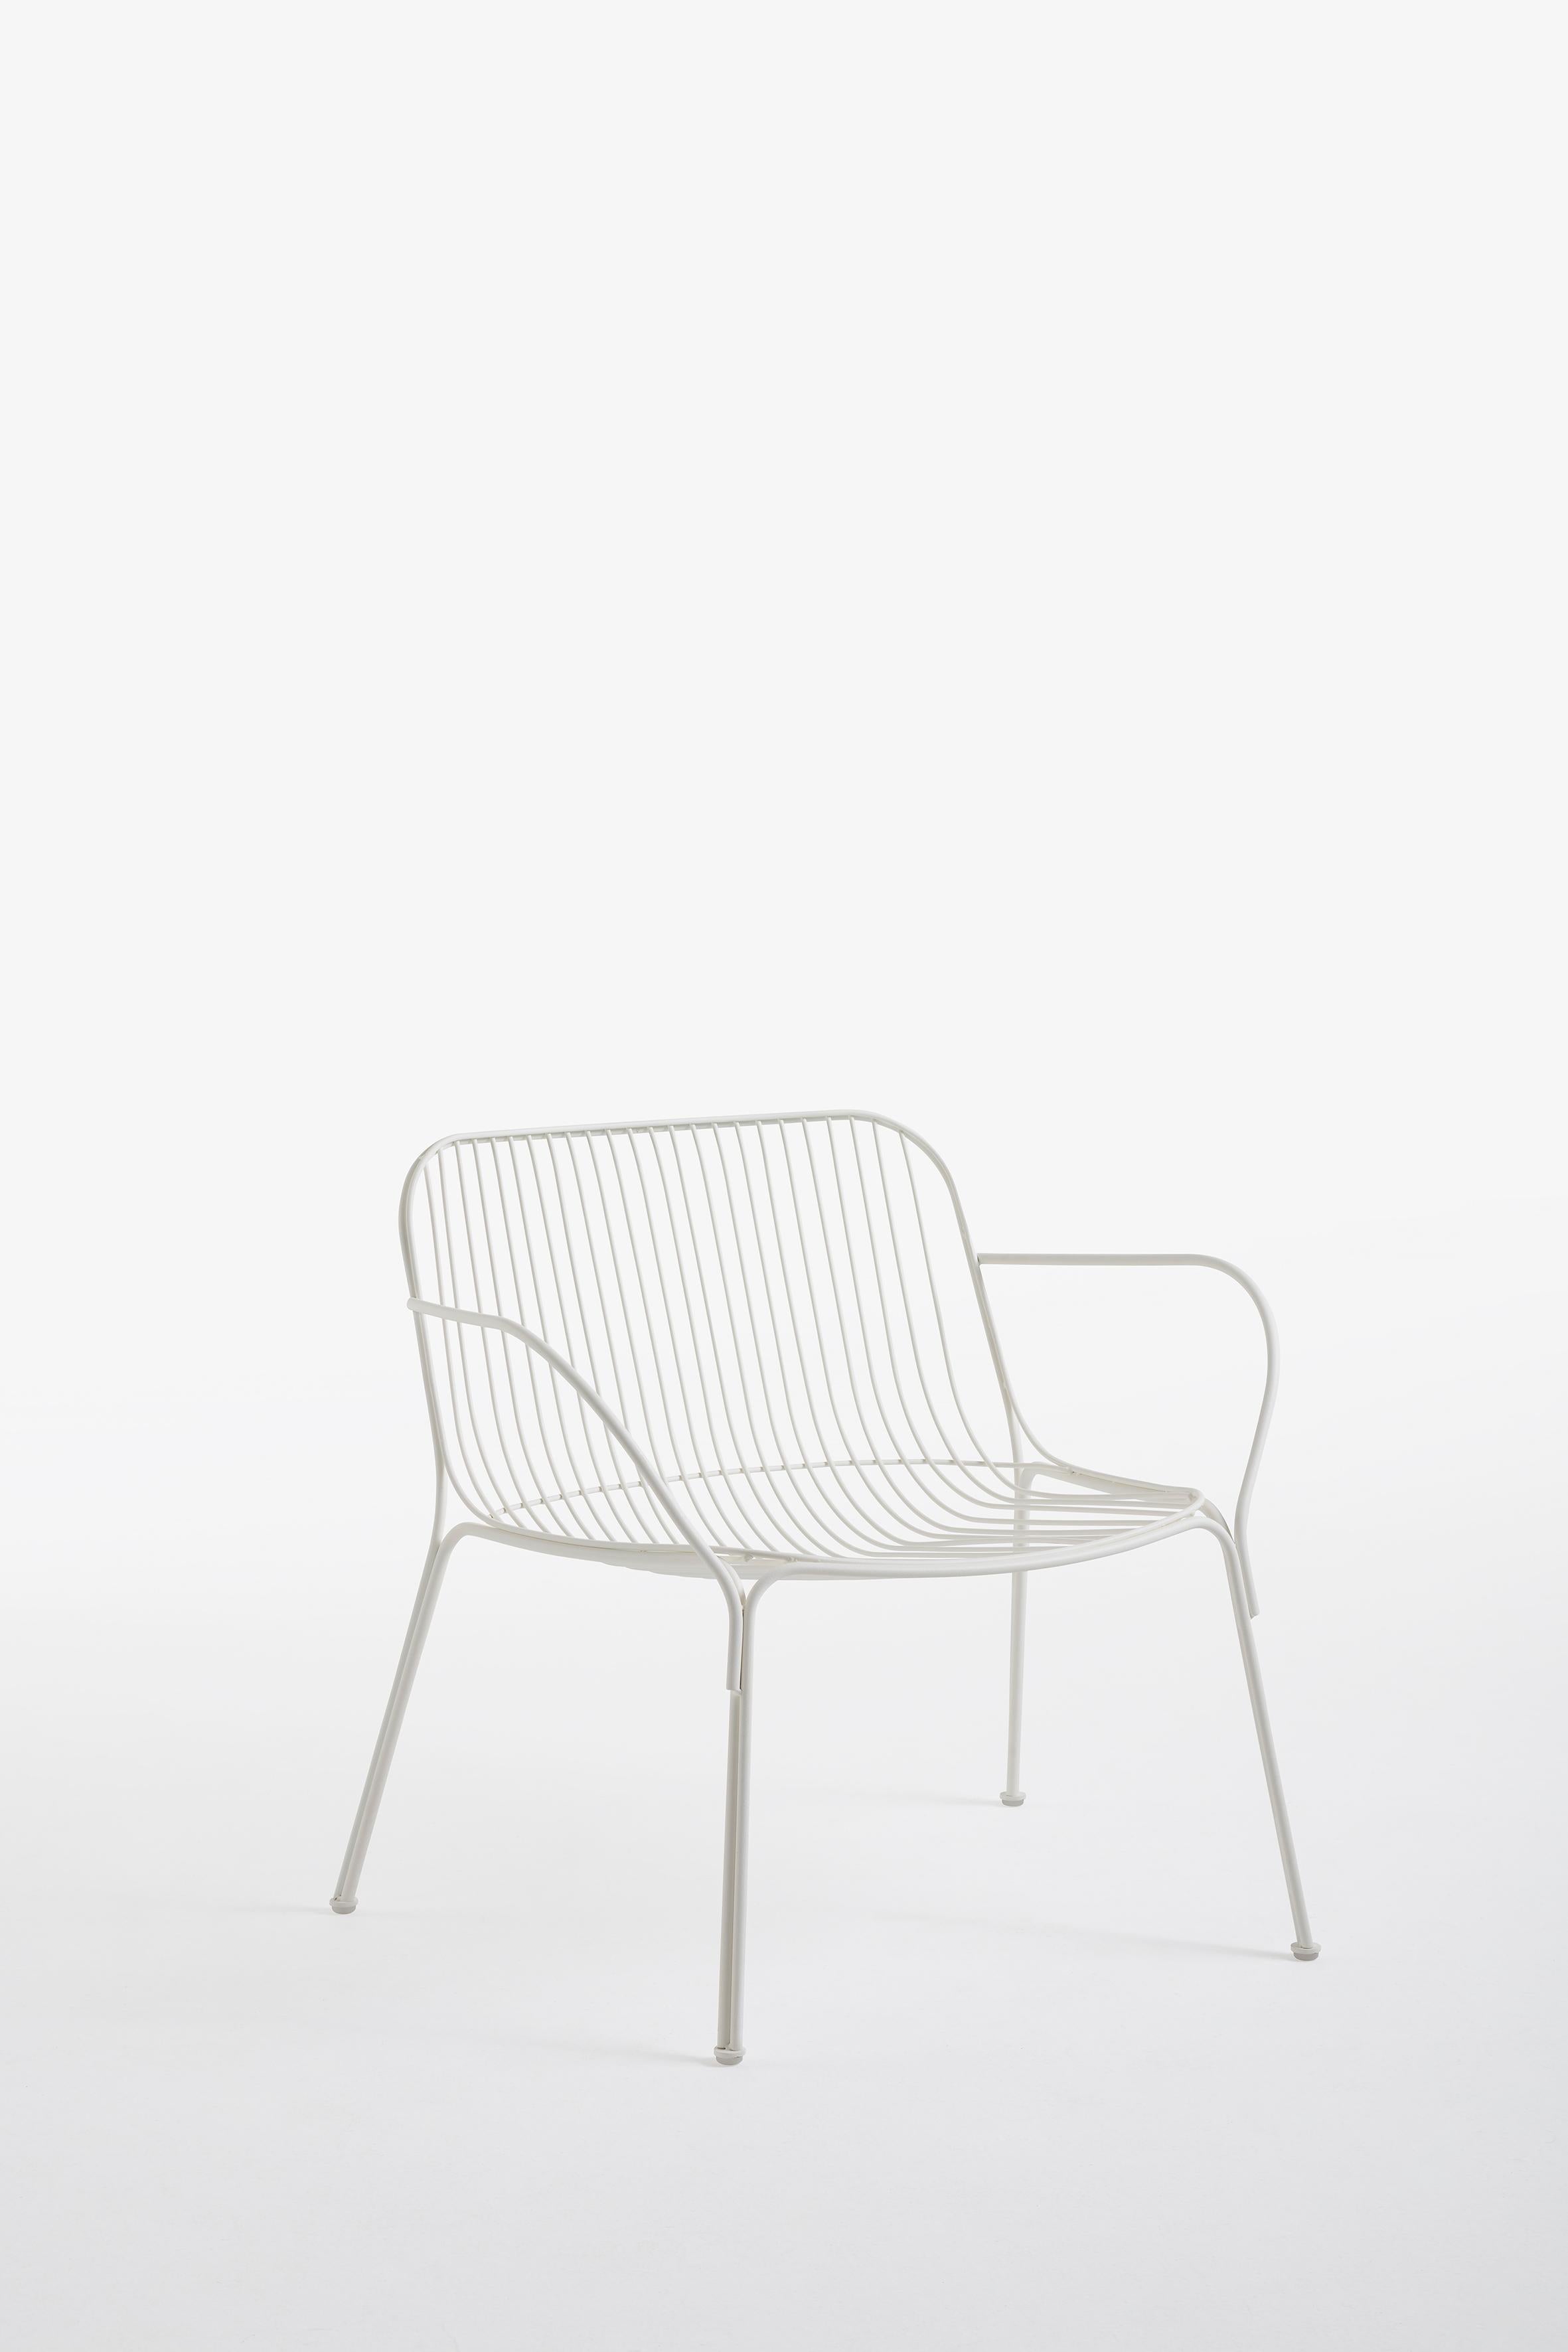 Italian Kartell Hiray Armchair by Ludovica + Roberto Palomba For Sale